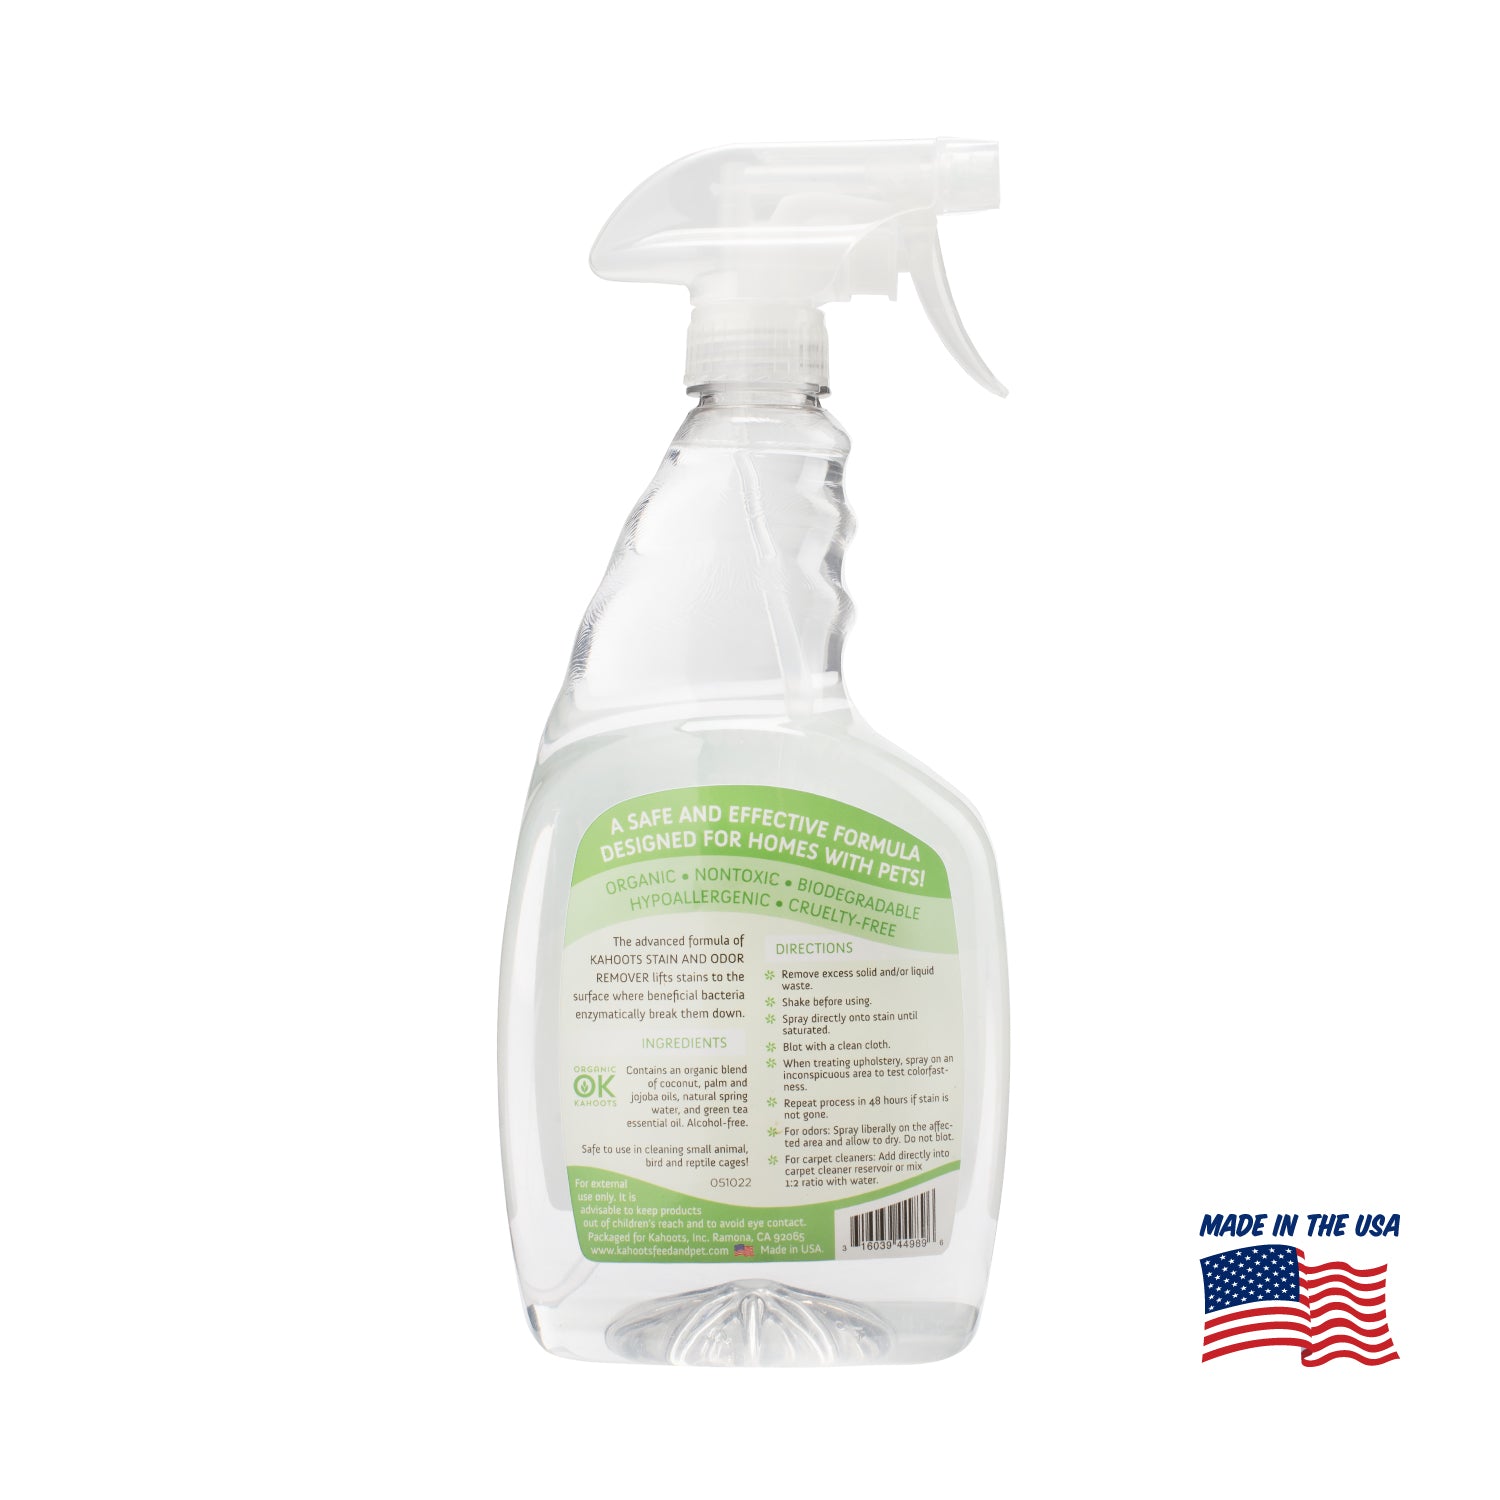 Back label, Kahoots stain and odor remover spray, green trea, made in the USA